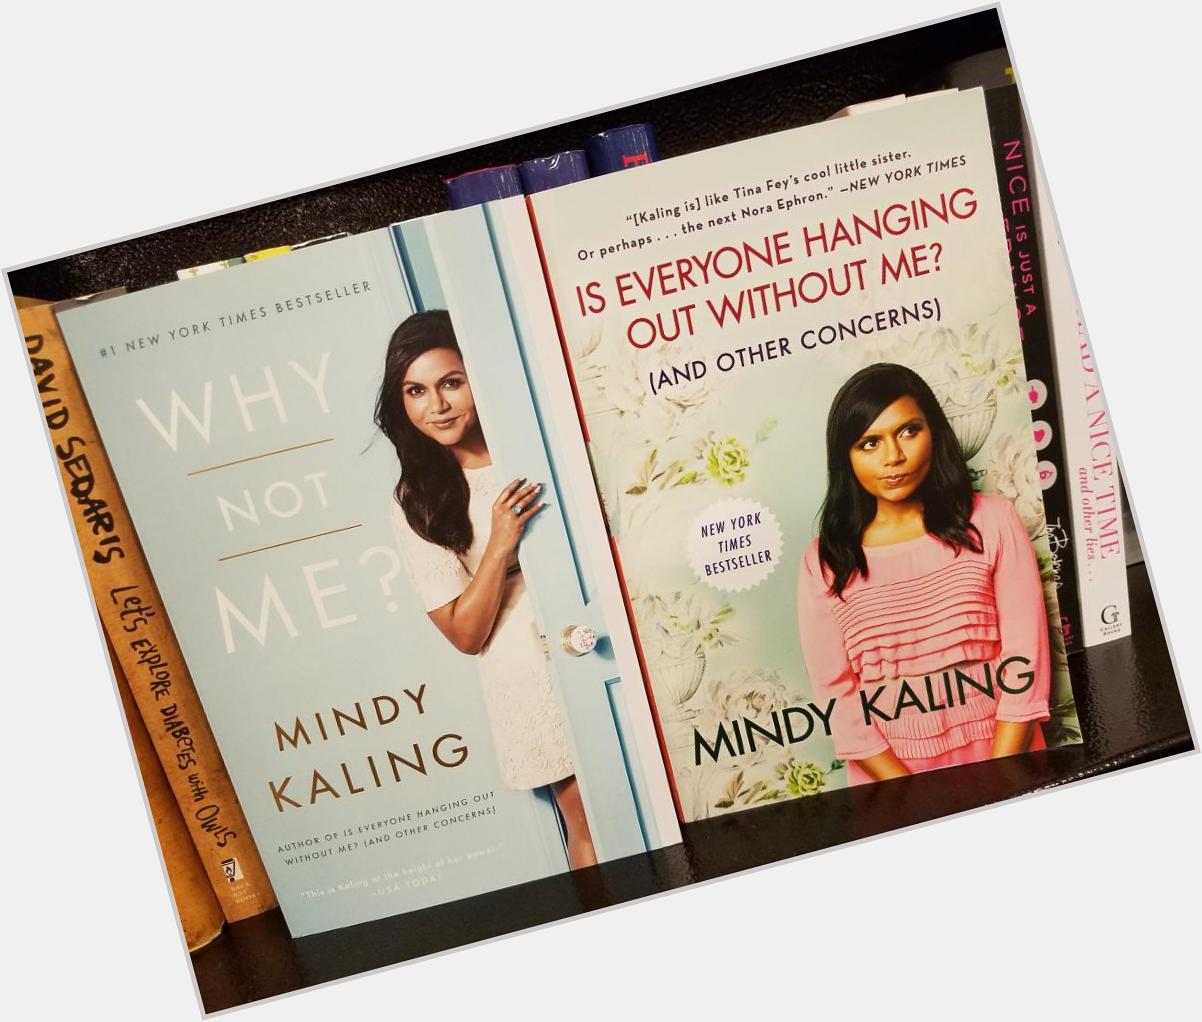 Happy Birthday to the hilarious Mindy Kaling! 